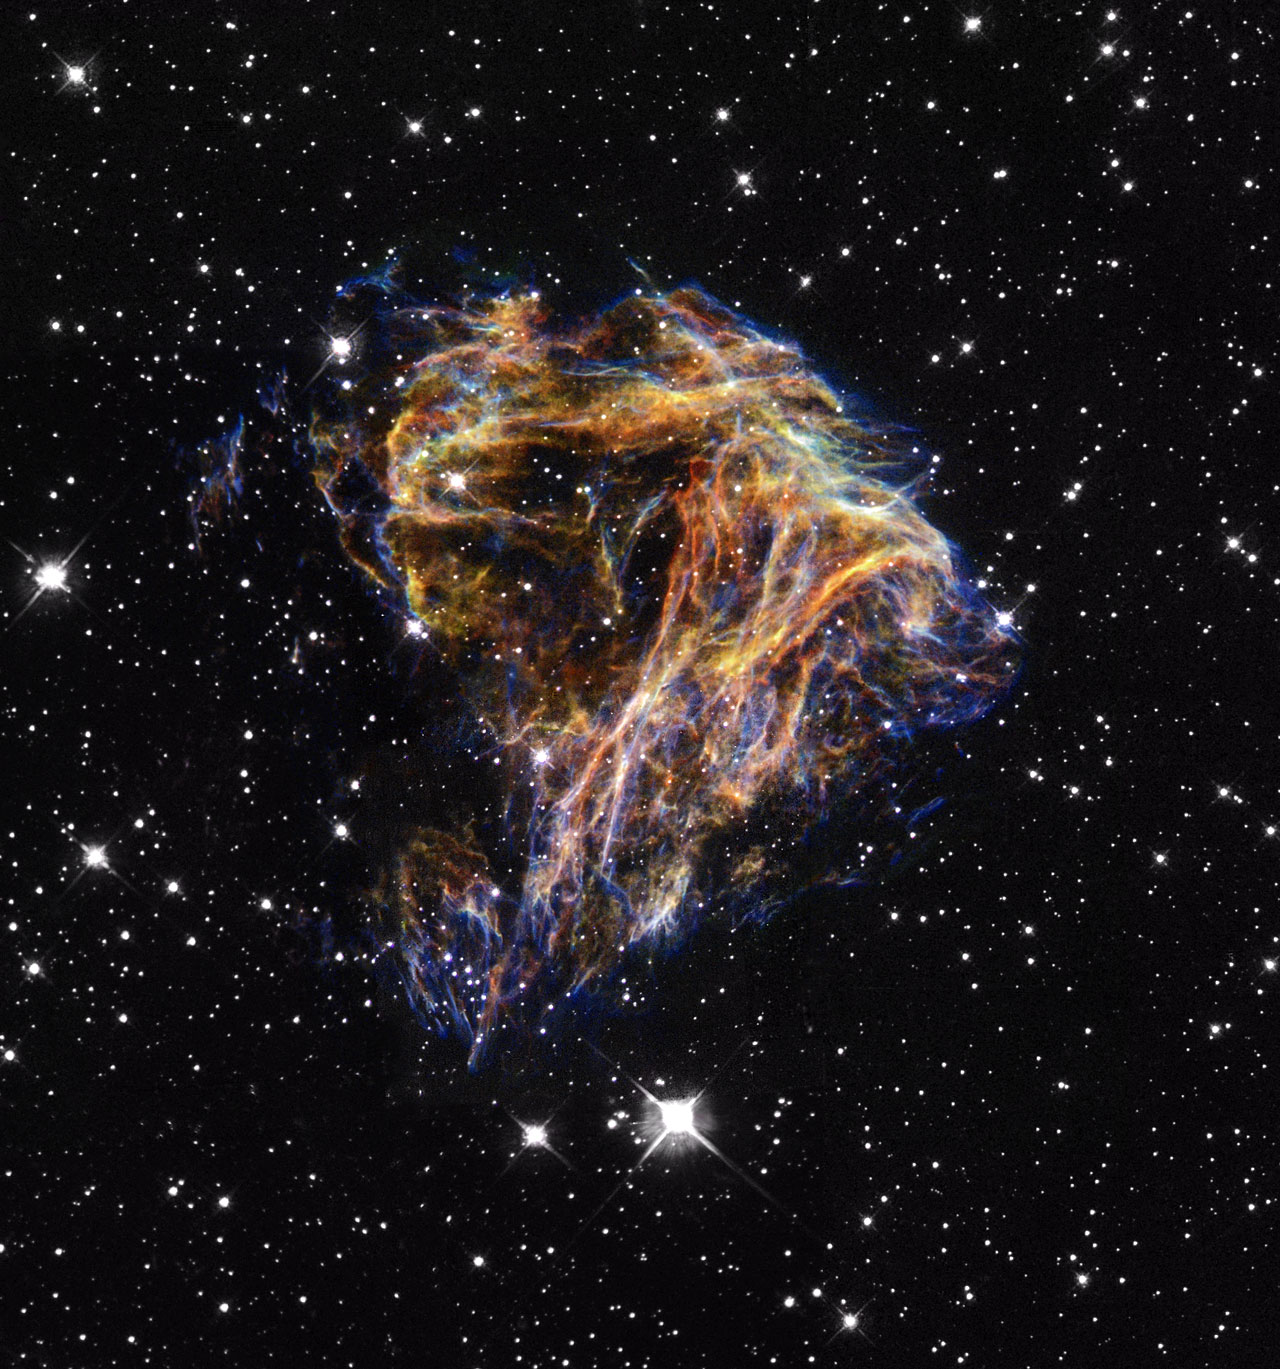 Resembling the puffs of smoke and sparks from a summer fireworksdisplay in this image from NASA/ESA Hubble Space Telescope, these delicate filaments are actually sheets of debris from a stellar explosion in a neighboring galaxy. Hubble's target was a supernova remnant within the Large Magellanic Cloud (LMC), a nearby, small companion galaxy to the Milky Way visible from the southern hemisphere. Denoted N 49, or DEM L 190, this remnant is from a massive star that died in a supernova blast whose light would have reached Earth thousands of years ago. This filamentary material will eventually be recycled into building new generations of stars in the LMC. Our own Sun and planets are constructed from similar debris of supernovae that exploded in the Milky Way billions of years ago.